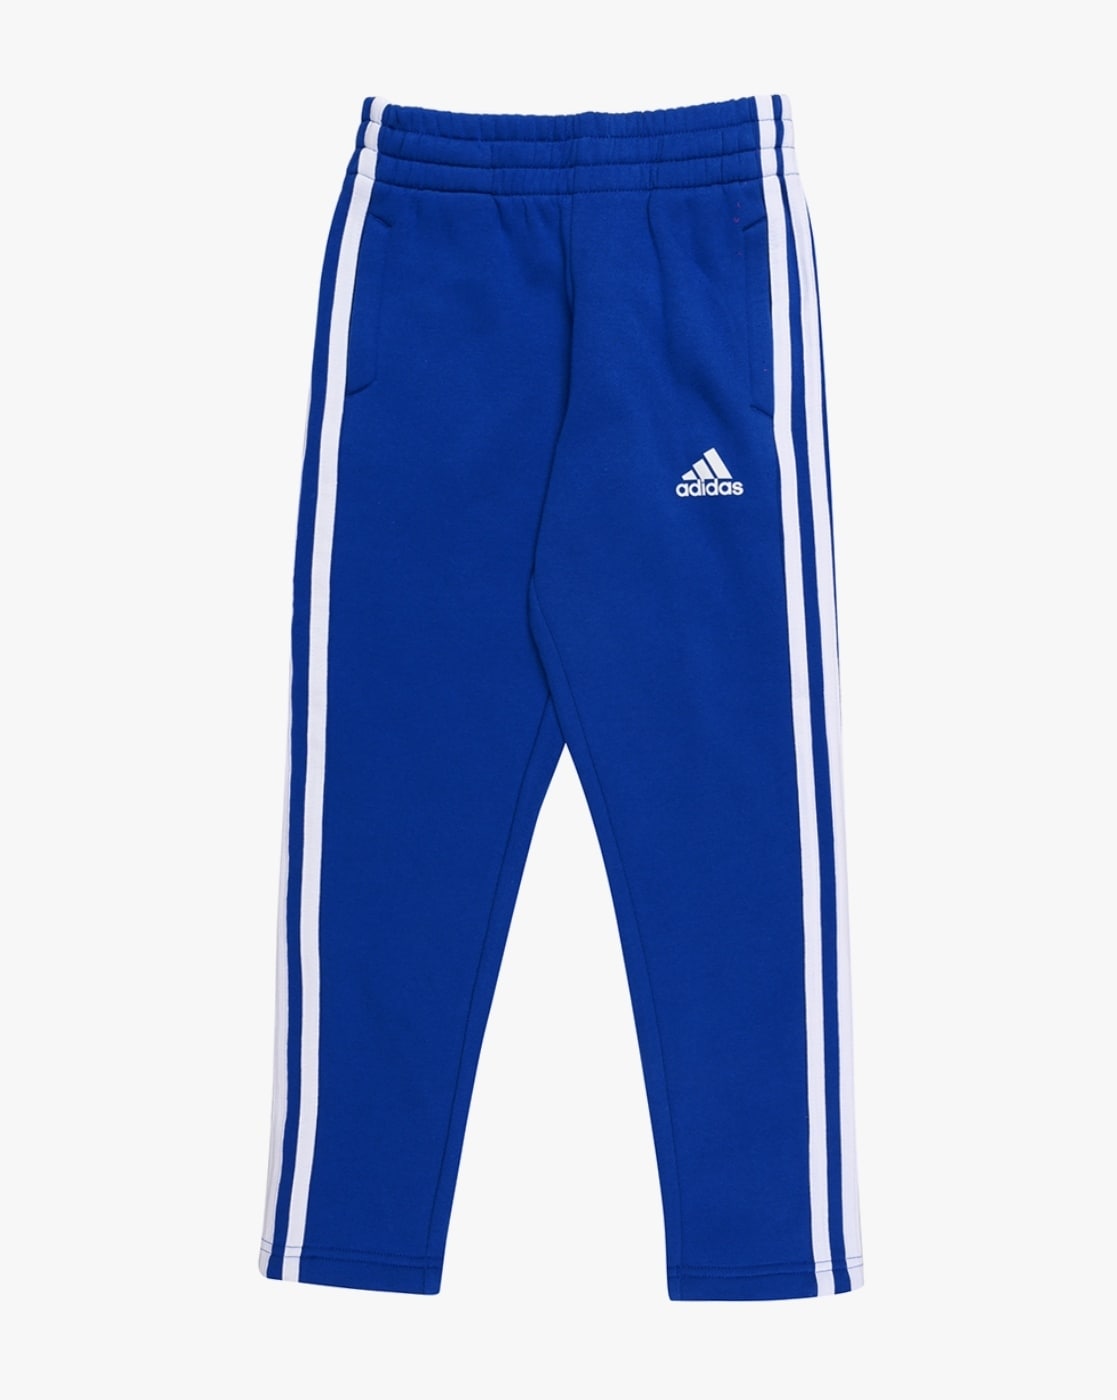 Buy Team Royal Blue Track Pants for Boys by Adidas Kids Online